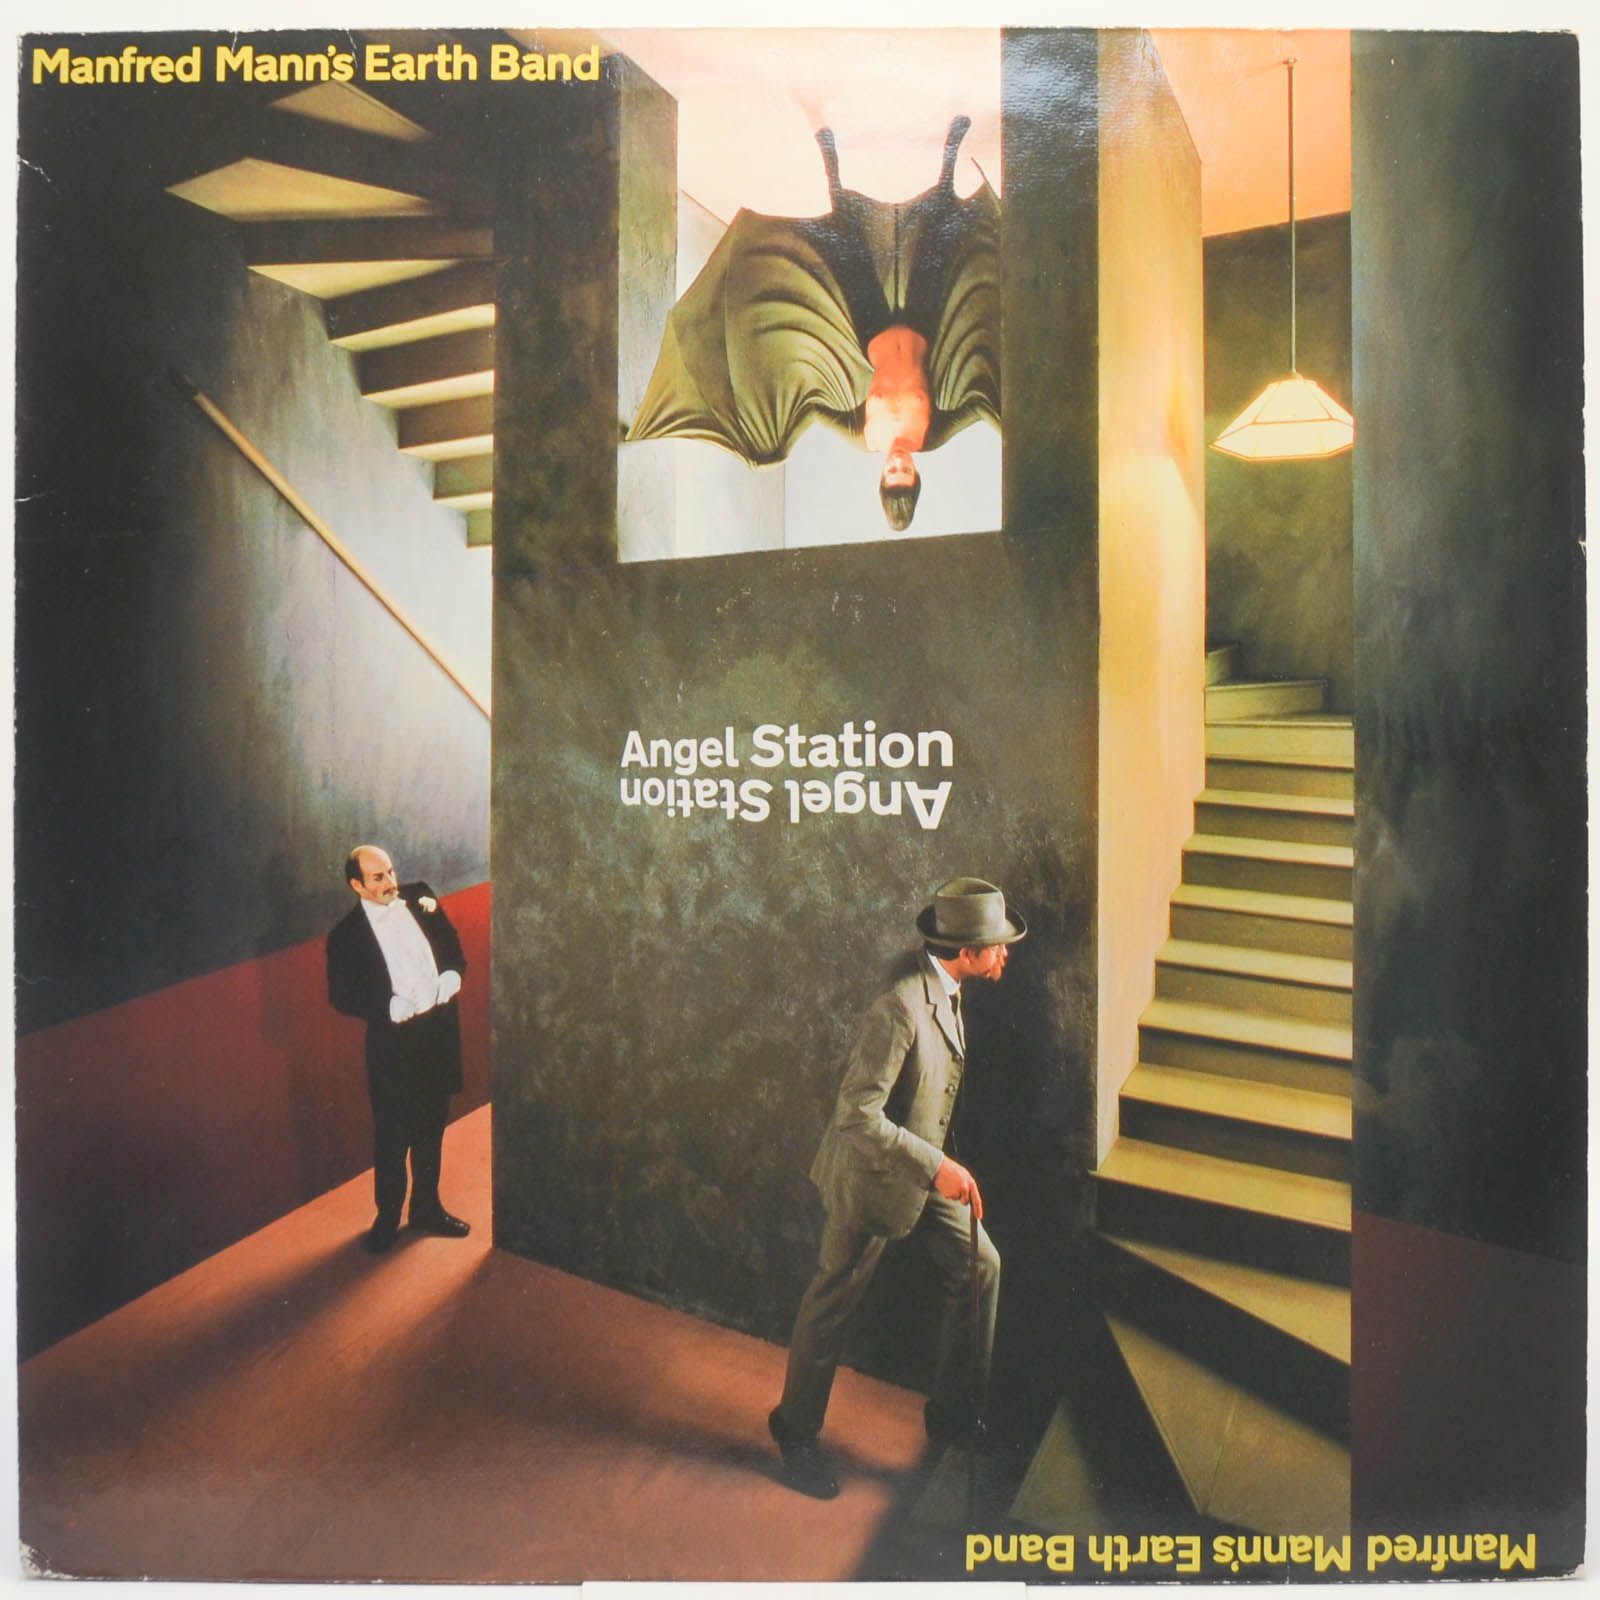 Manfred Mann's Earth Band — Angel Station (poster), 1979